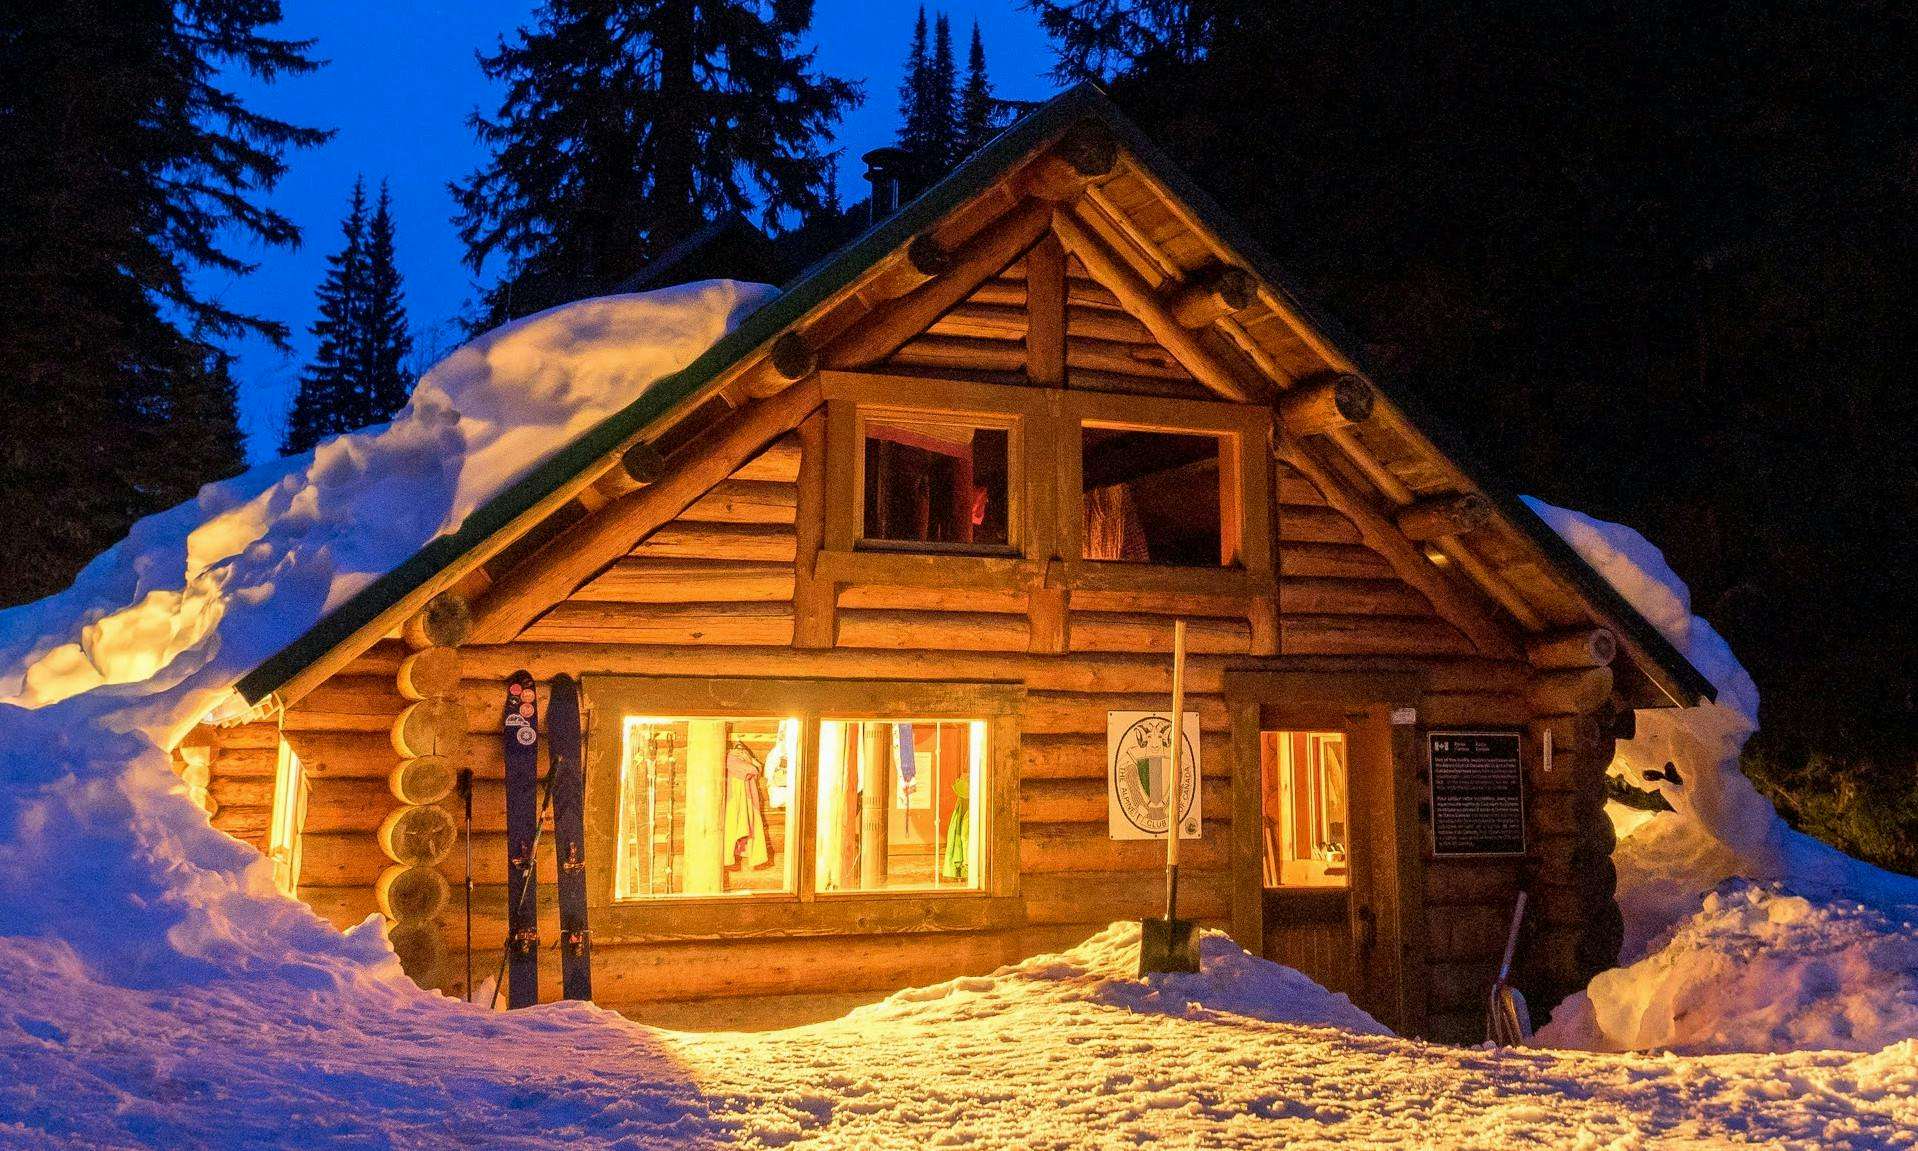 Wood cabin in a winter forest at night